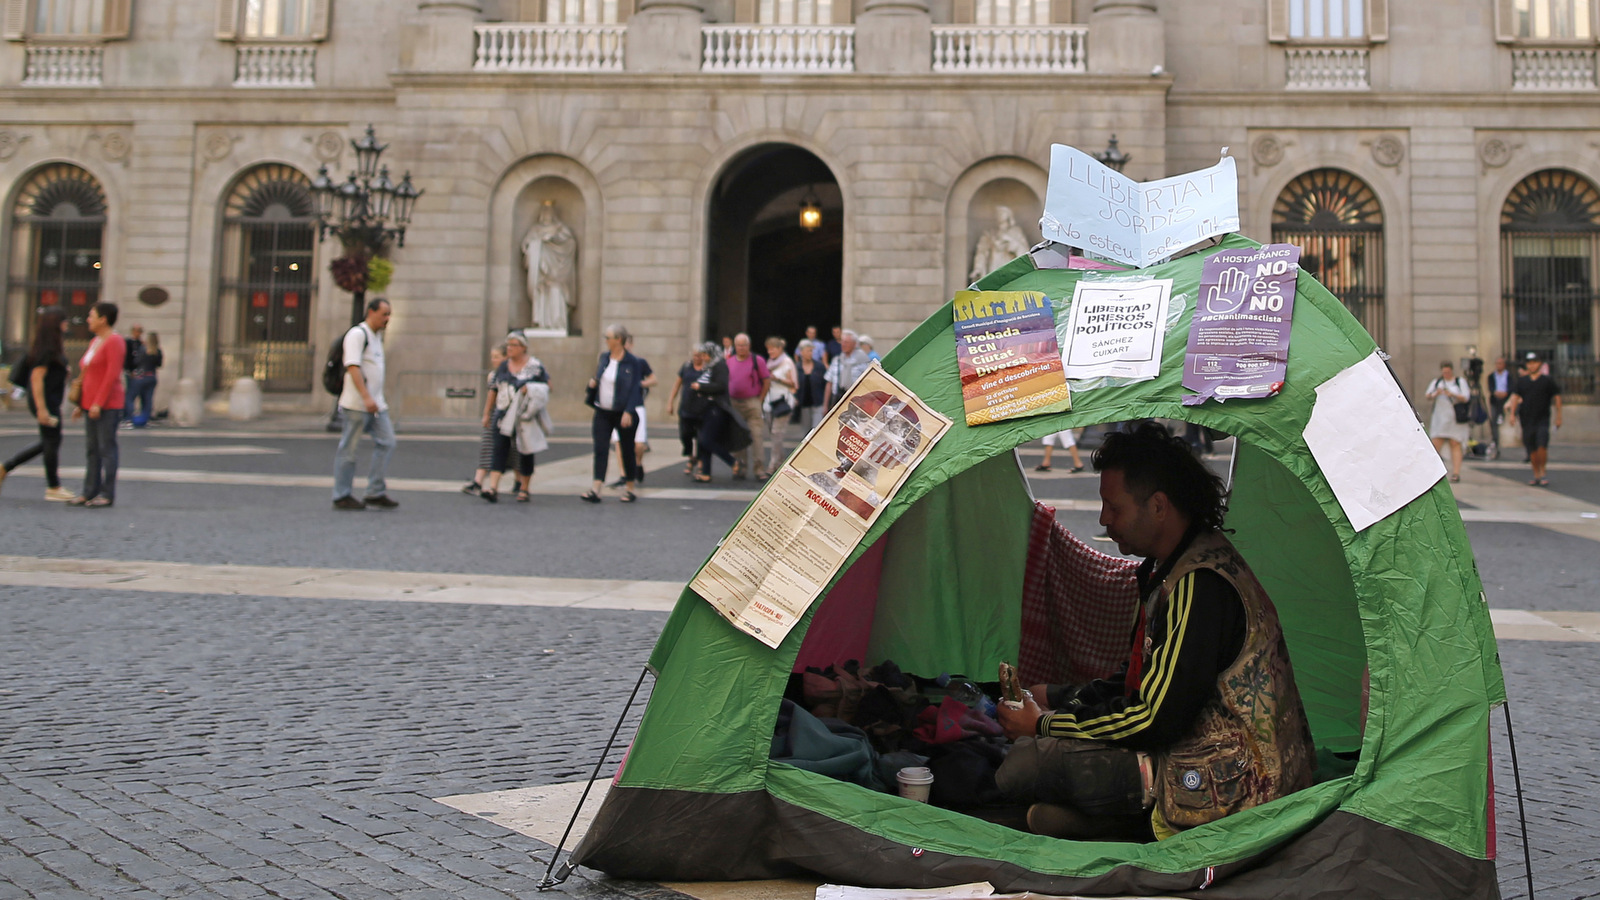 A man eats a sandwich as he camps protesting for the National Court decision to imprison civil society leaders without bail in front of the Palau Generalitat in Barcelona, Spain, Tuesday, Oct. 17, 2017. A Spanish judge's decision to jail the leaders of two Catalan grassroots groups, Catalan National Assembly and Omnium Cultural, was met with a chorus banging pots and pans, honking car horns and clapping in the streets of Barcelona. (AP Photo/Manu Fernandez)